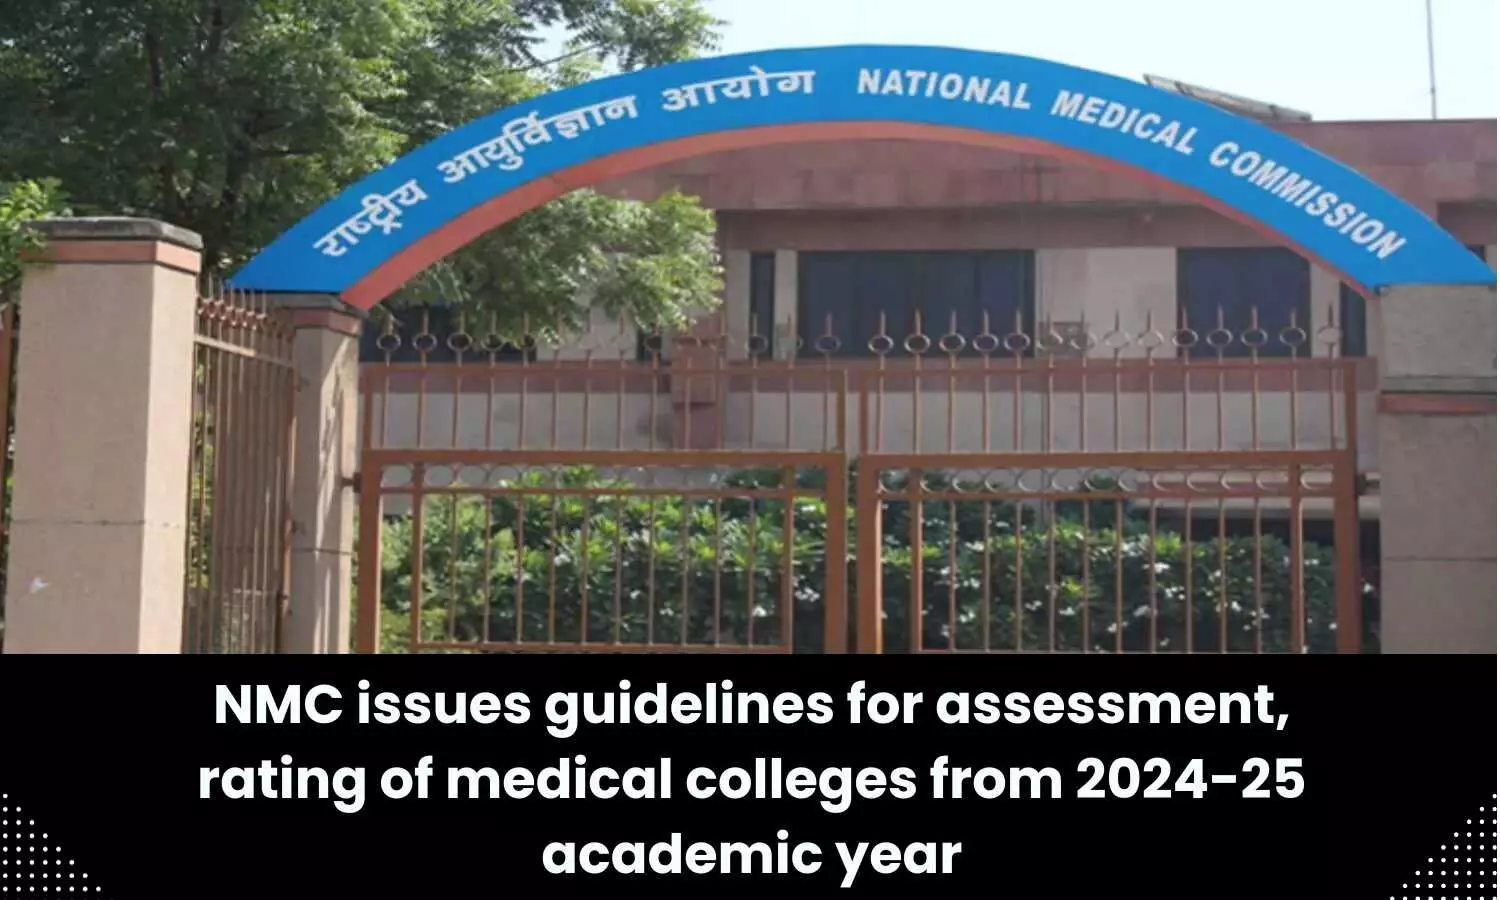 NMC releases guidelines for rating, assessment of medical colleges from 2024-25 academic year